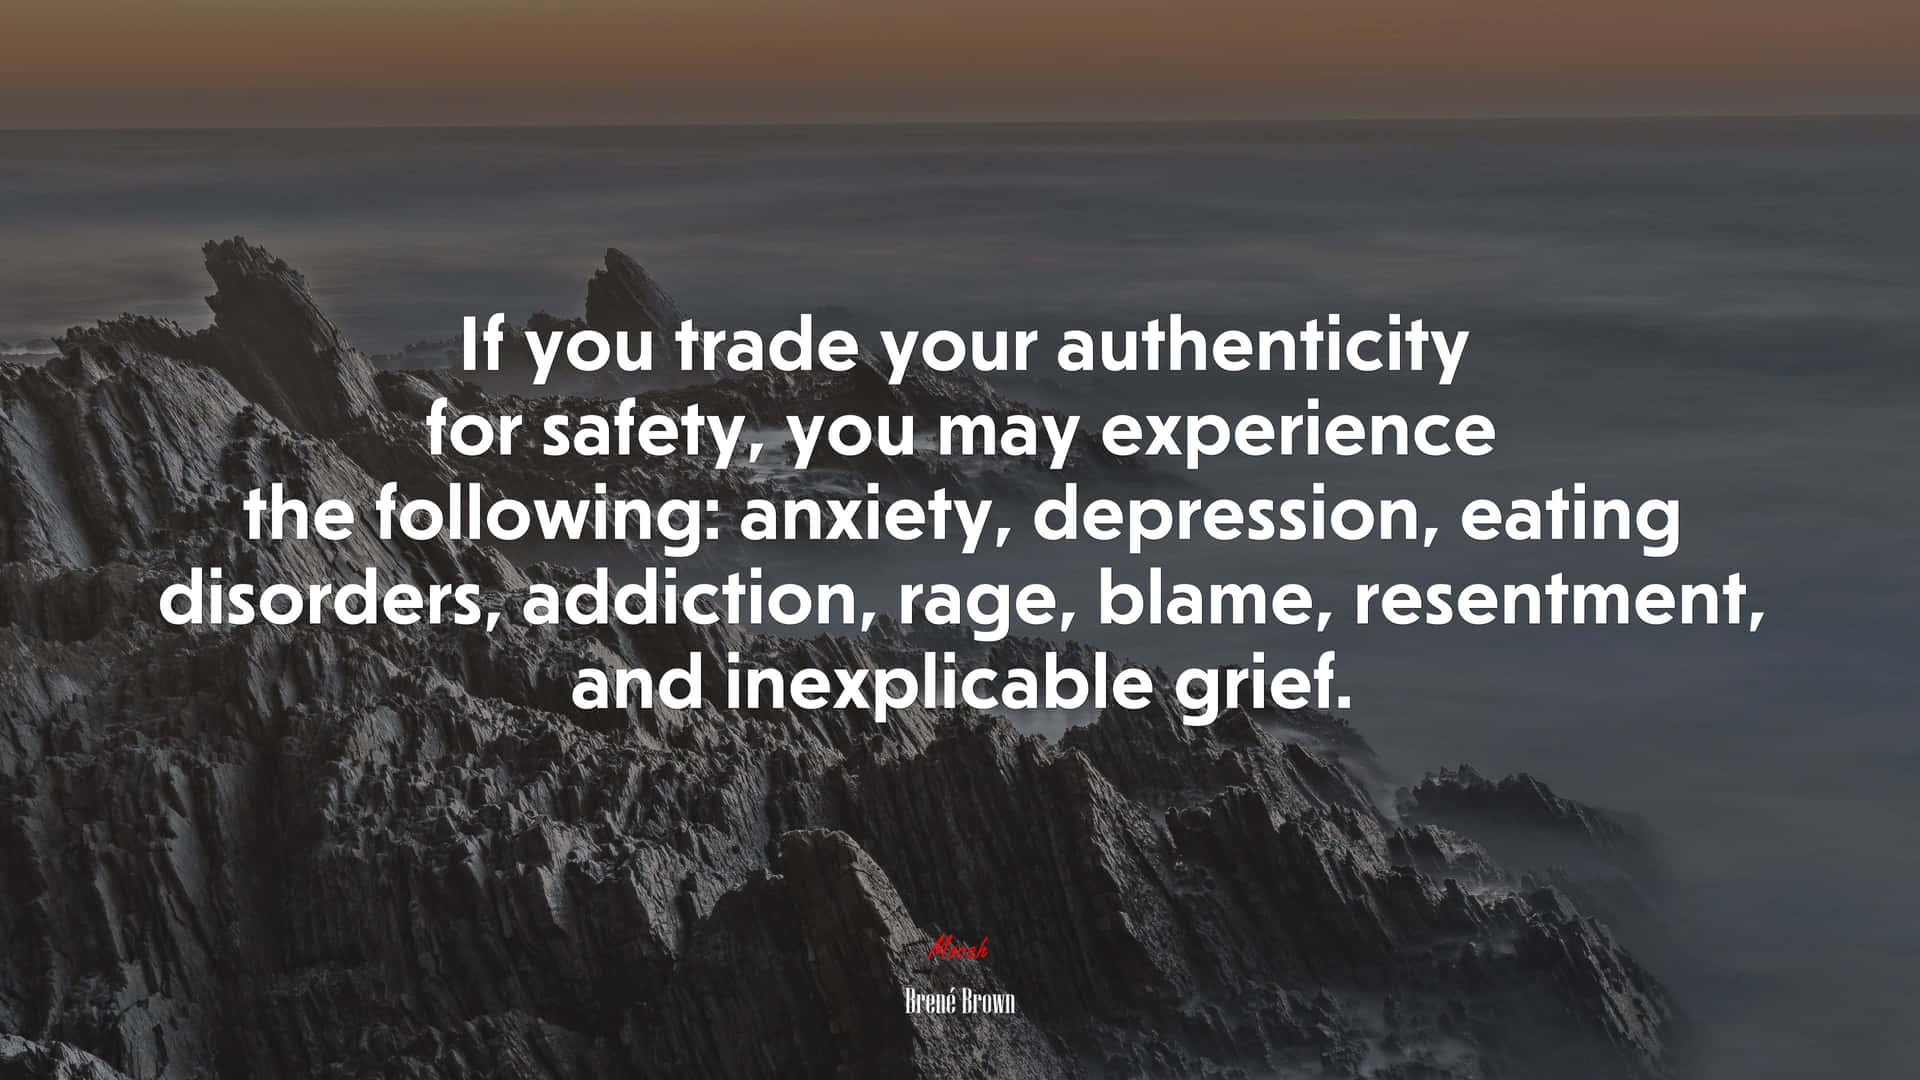 Trading Authenticity May Lead To Addiction Quote Wallpaper